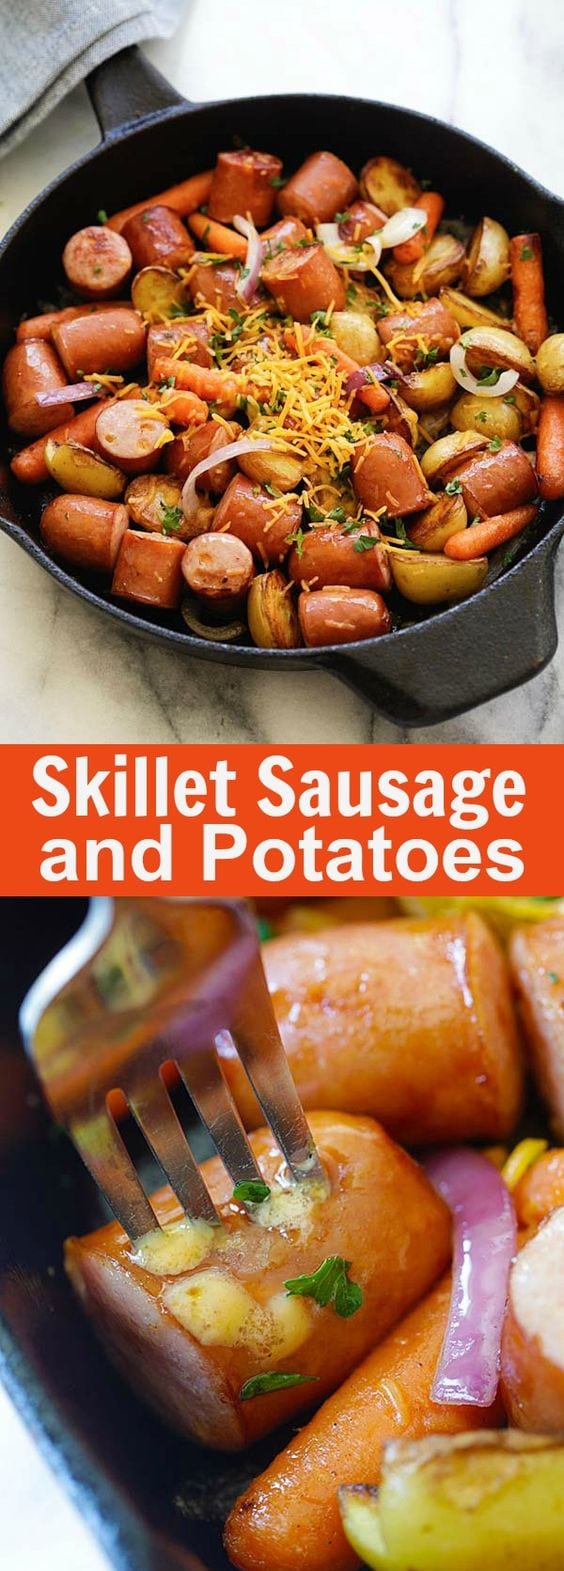 Skillet Sausage and Potatoes – easy and quick smoked sausages with potatoes and carrots on a skillet. Perfect for weekend camping trips | rasamalaysia.com